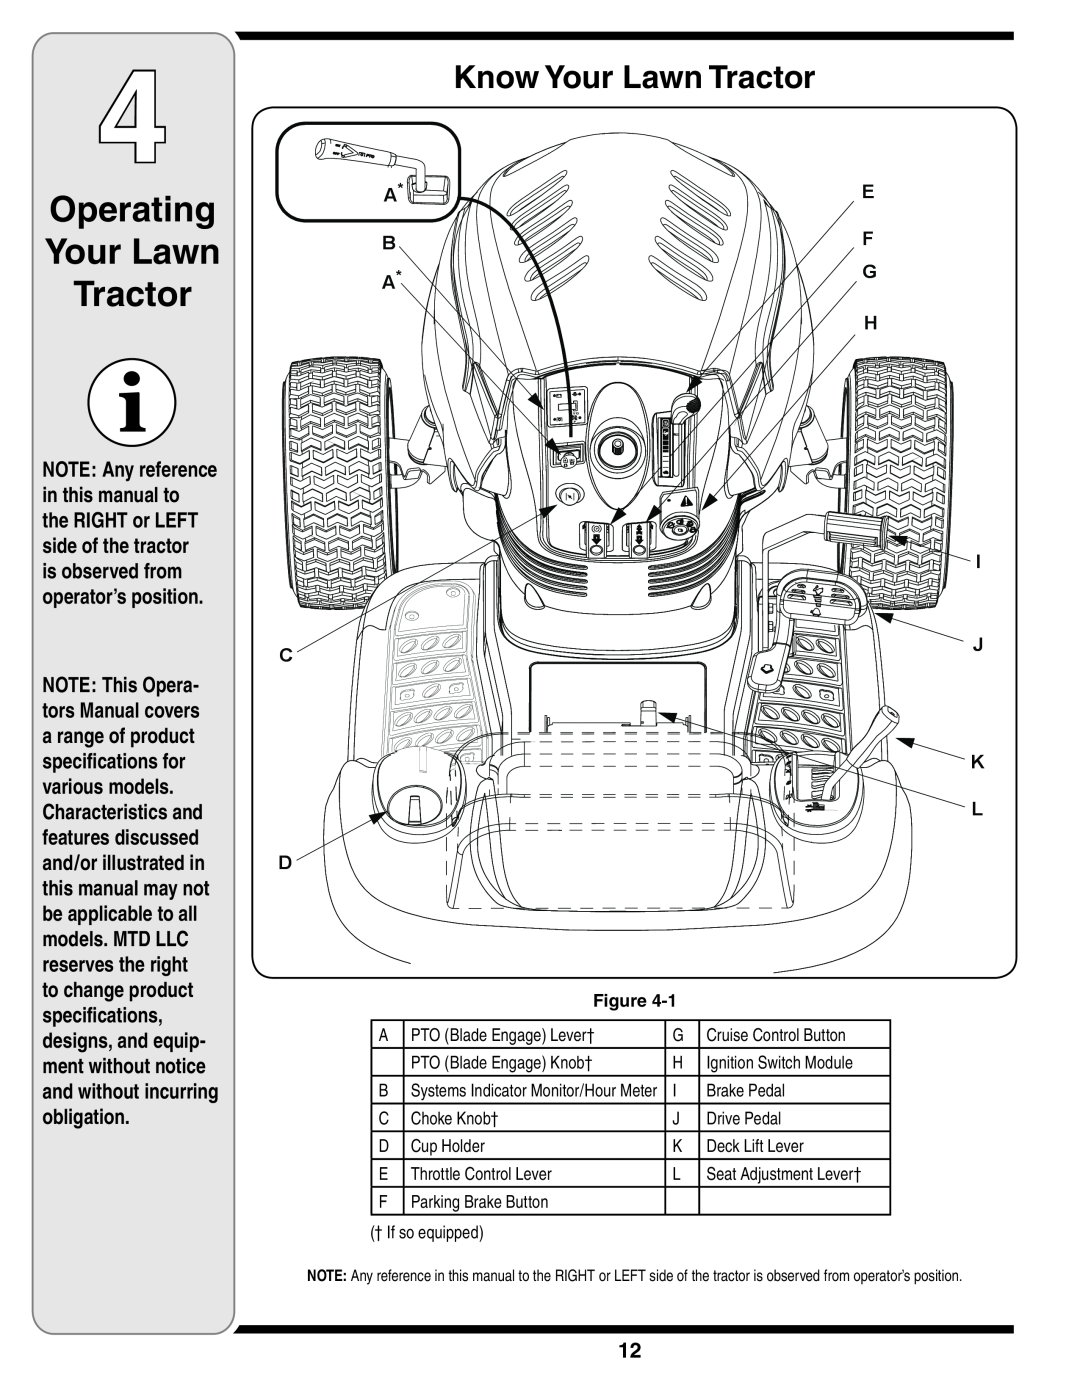 MTD 616 warranty Operating Your Lawn Tractor, Know Your Lawn Tractor, A B A, E F G H, J K L 